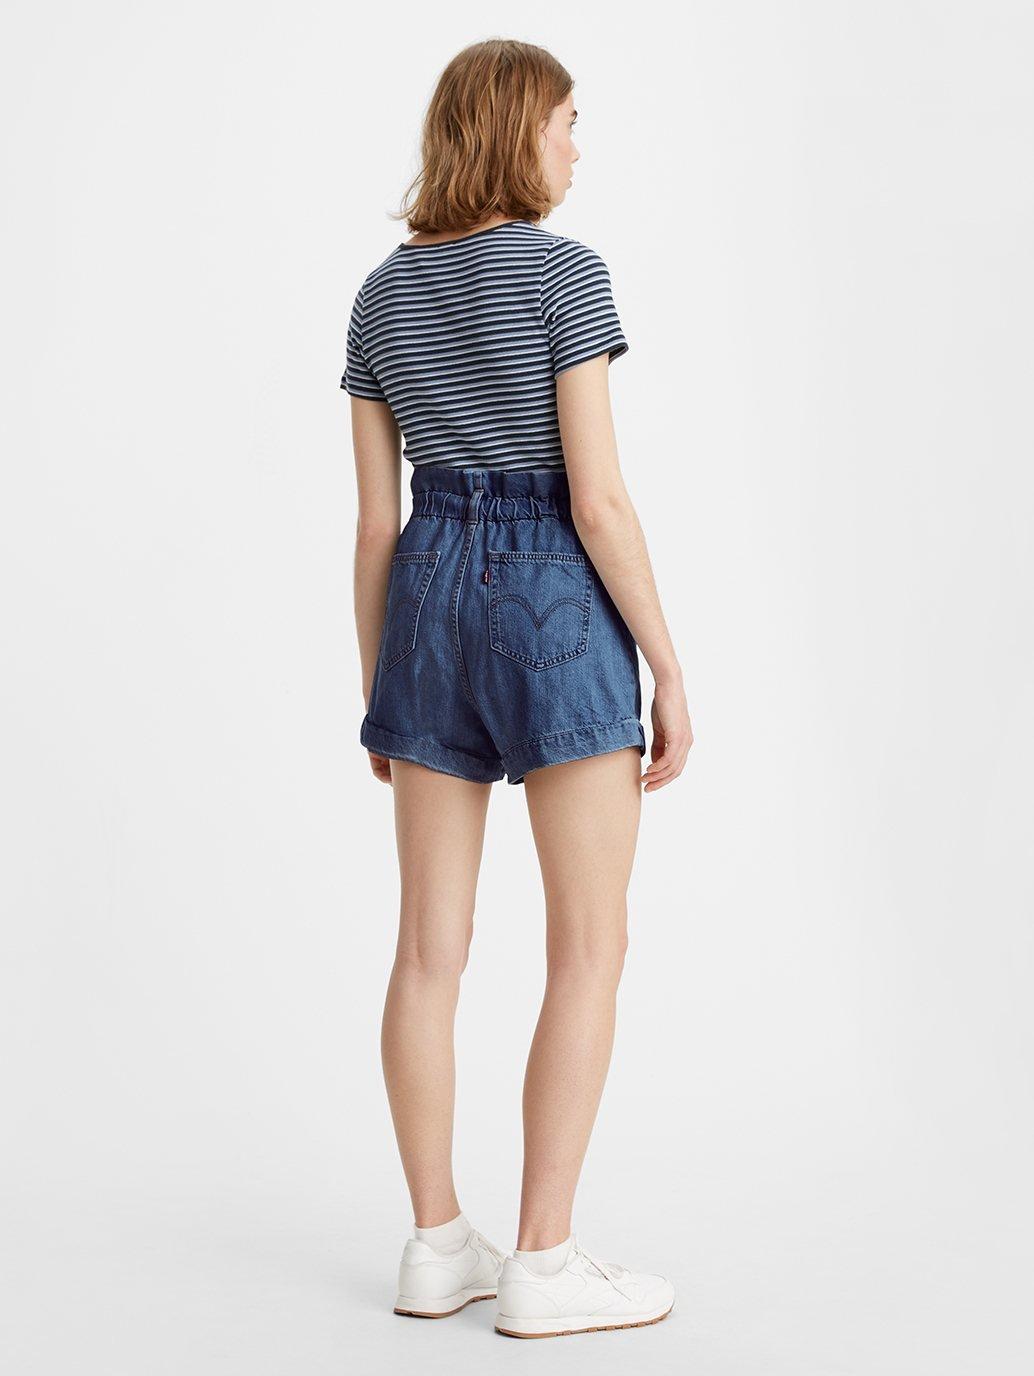 levis malaysia high waisted paperbag shorts 376800001 02 Back